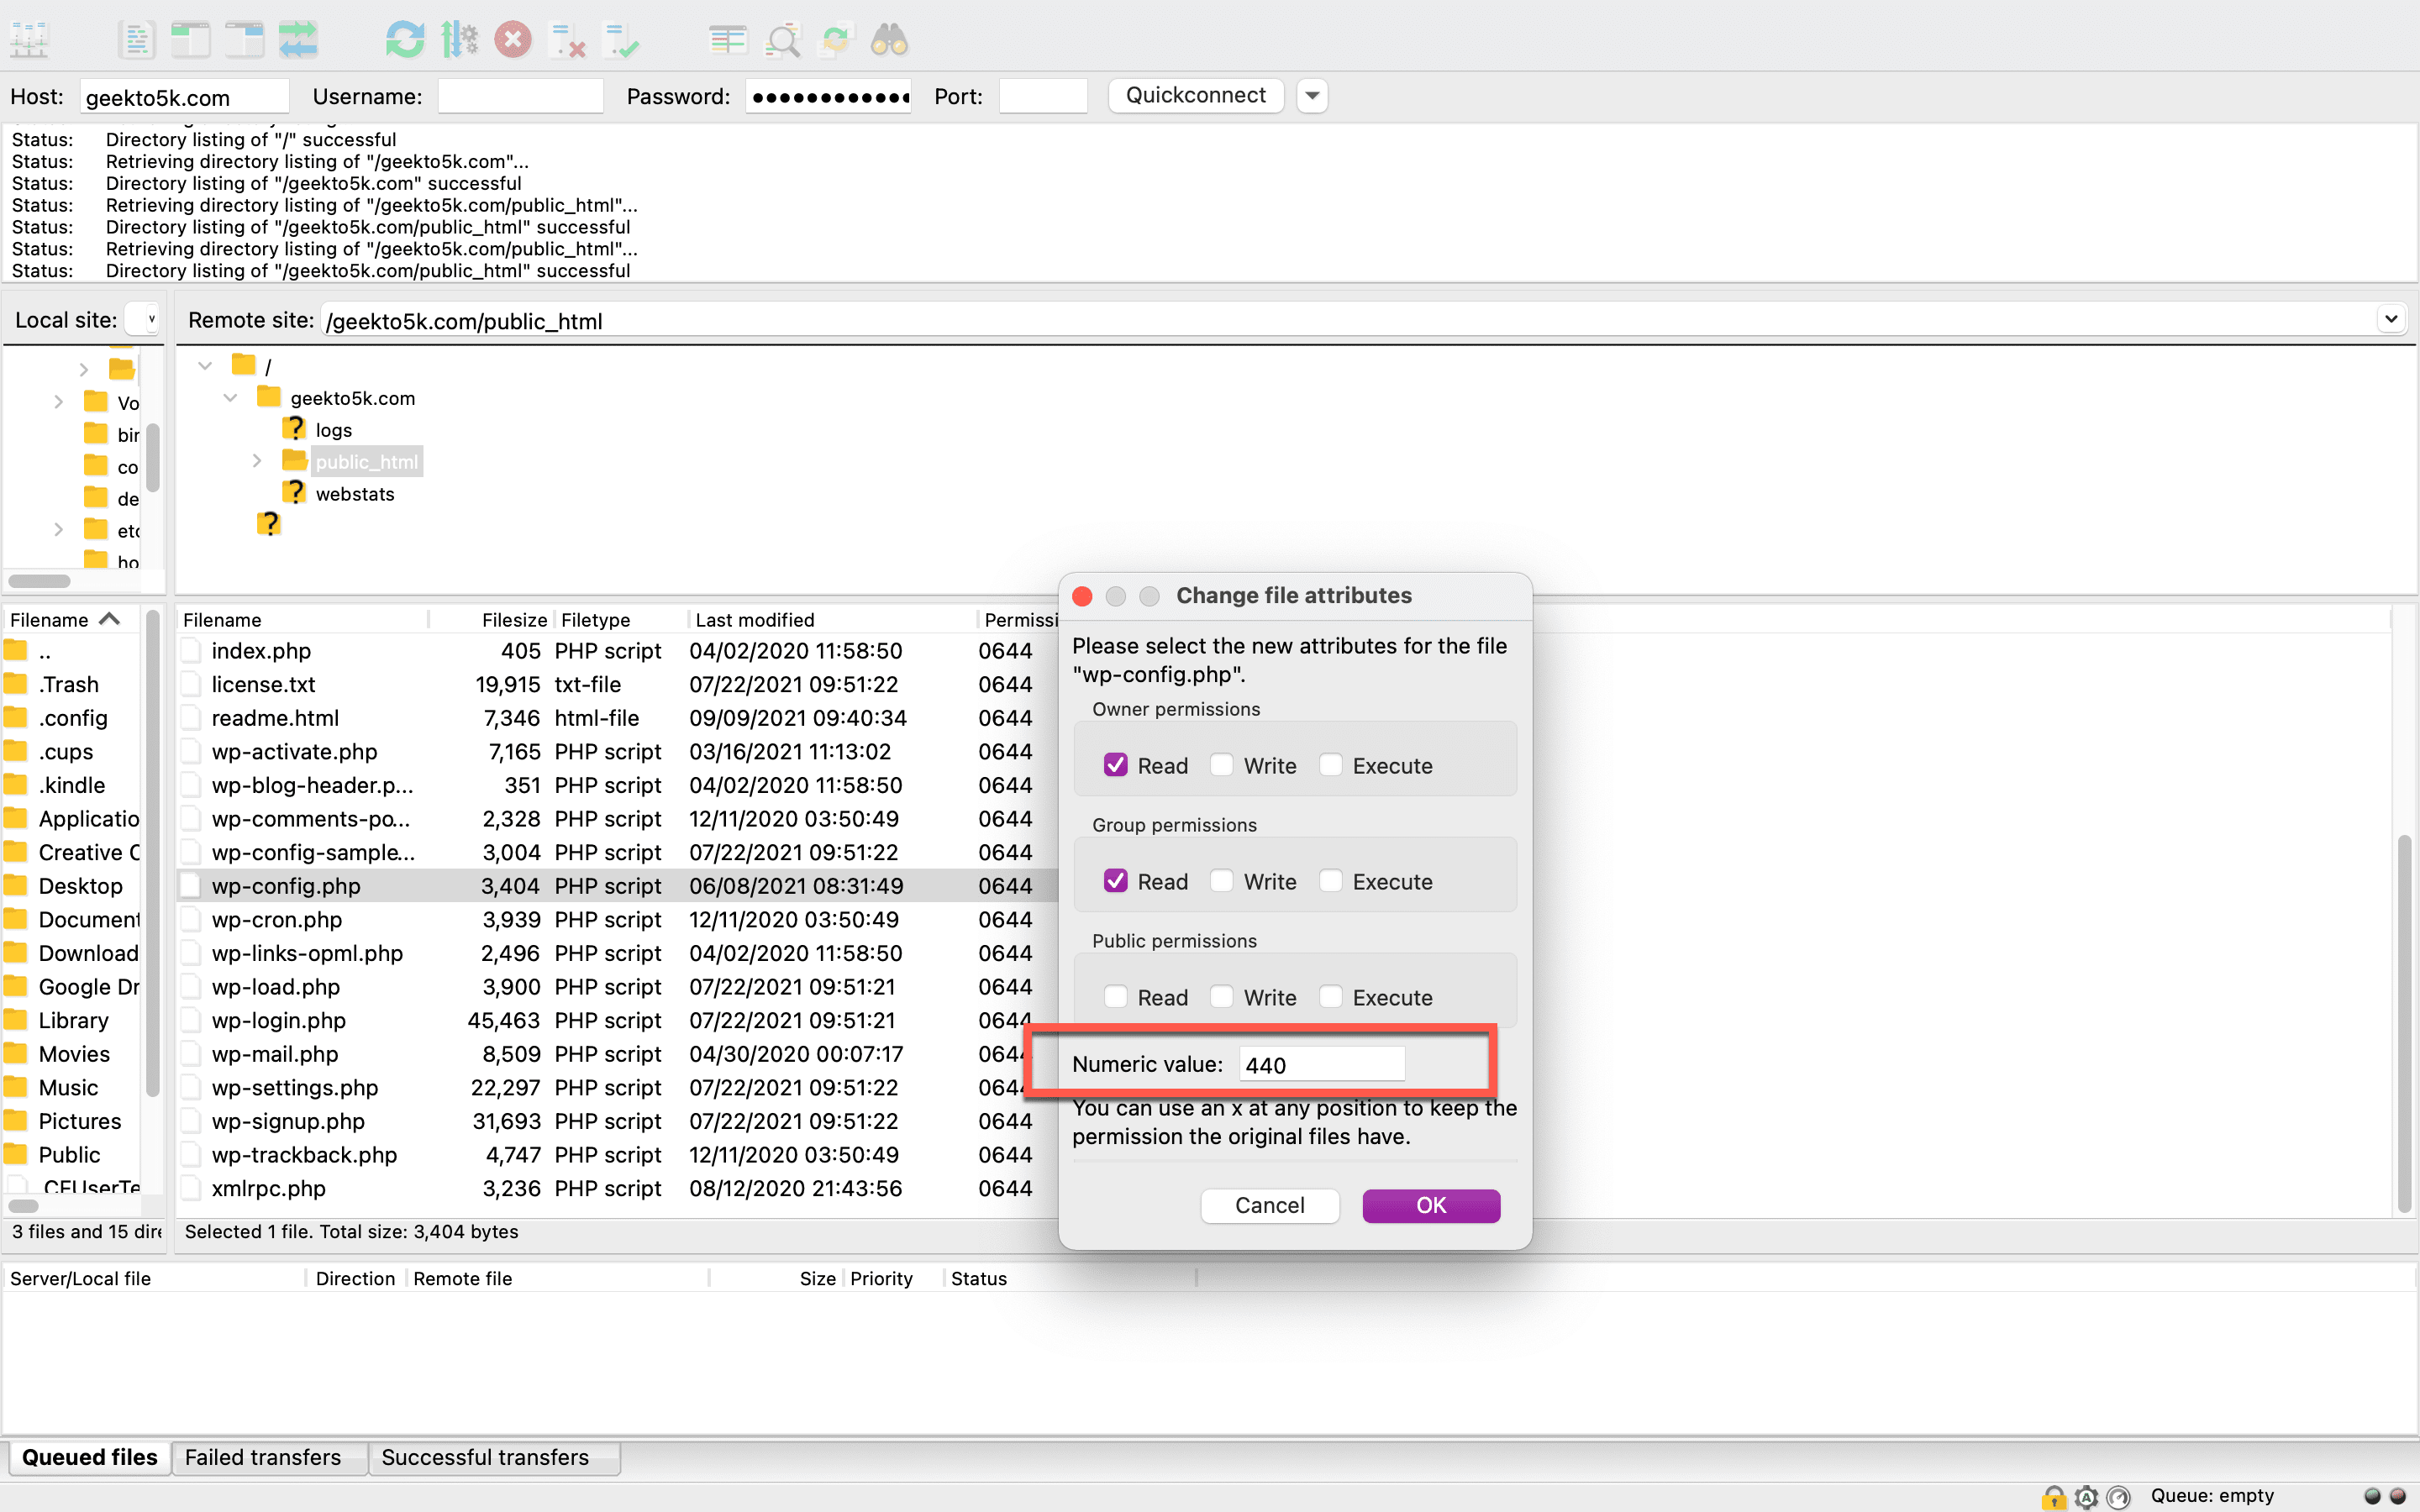 Forbidden (403) iFrame when viewing invoice in client portal